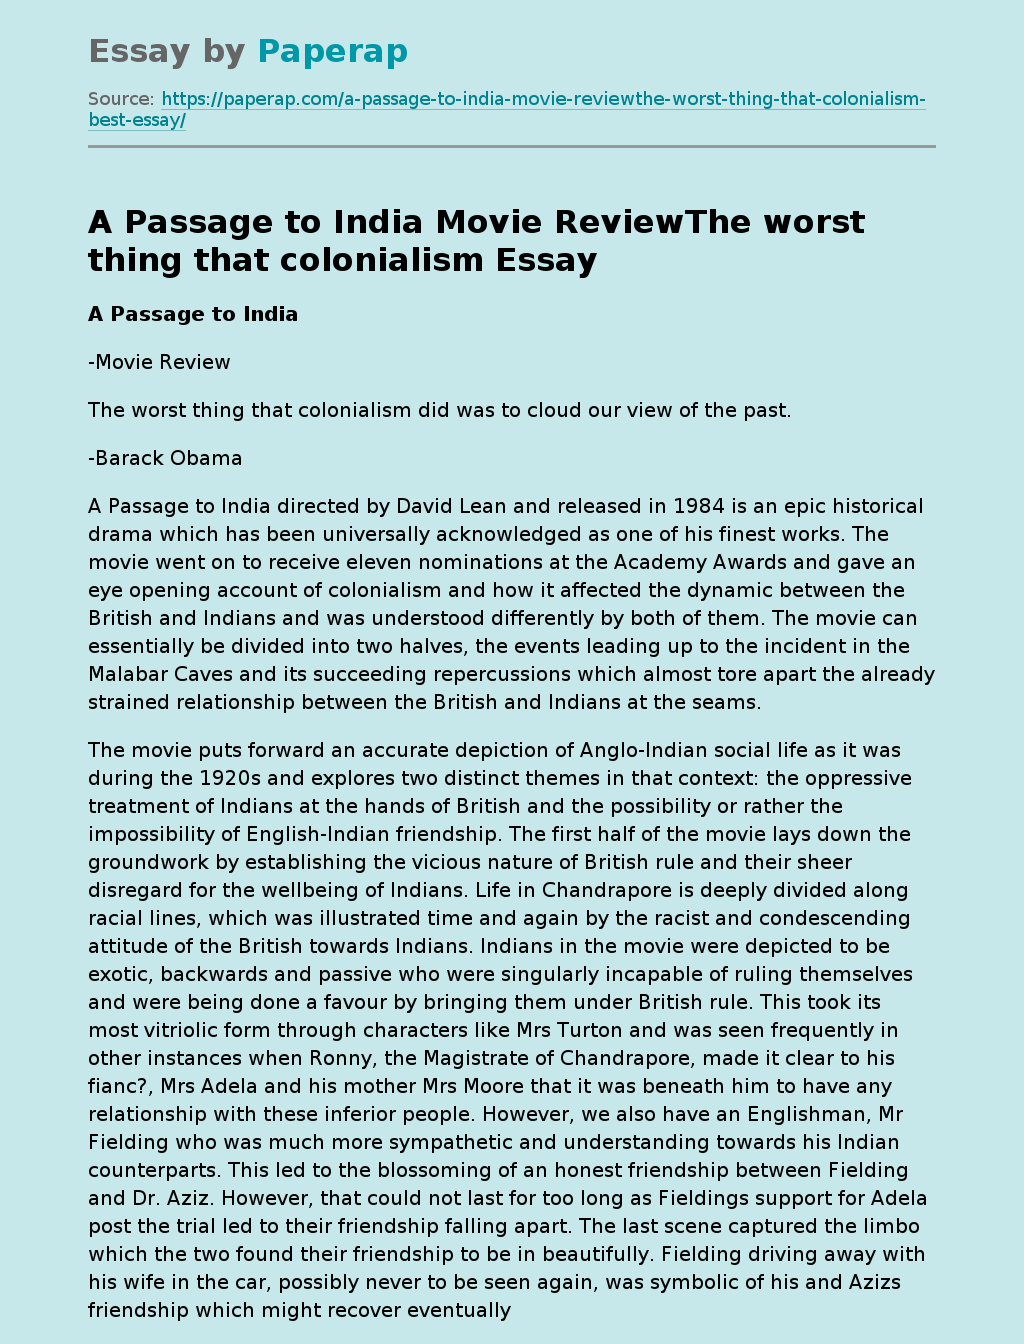 A Passage to India Movie ReviewThe worst thing that colonialism